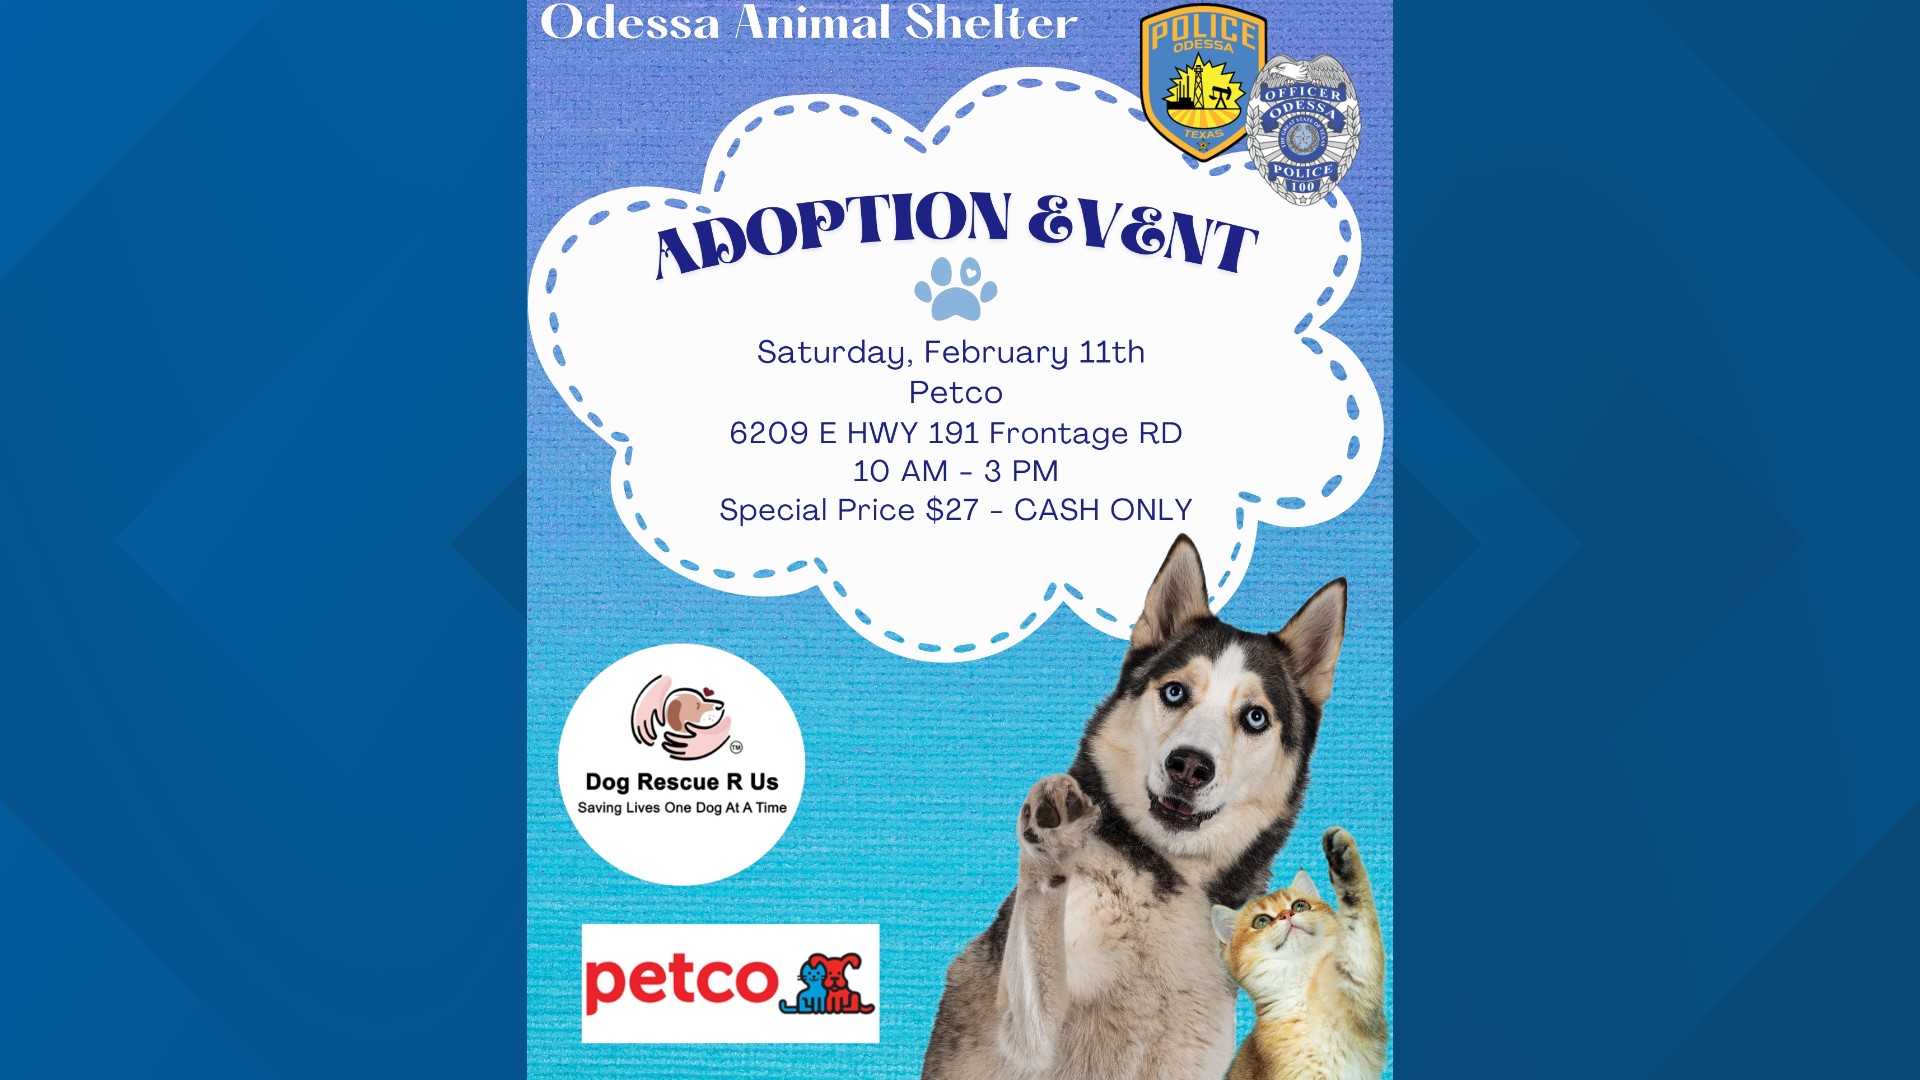 Odessa Animal Shelter to hold adoption event on February 11 